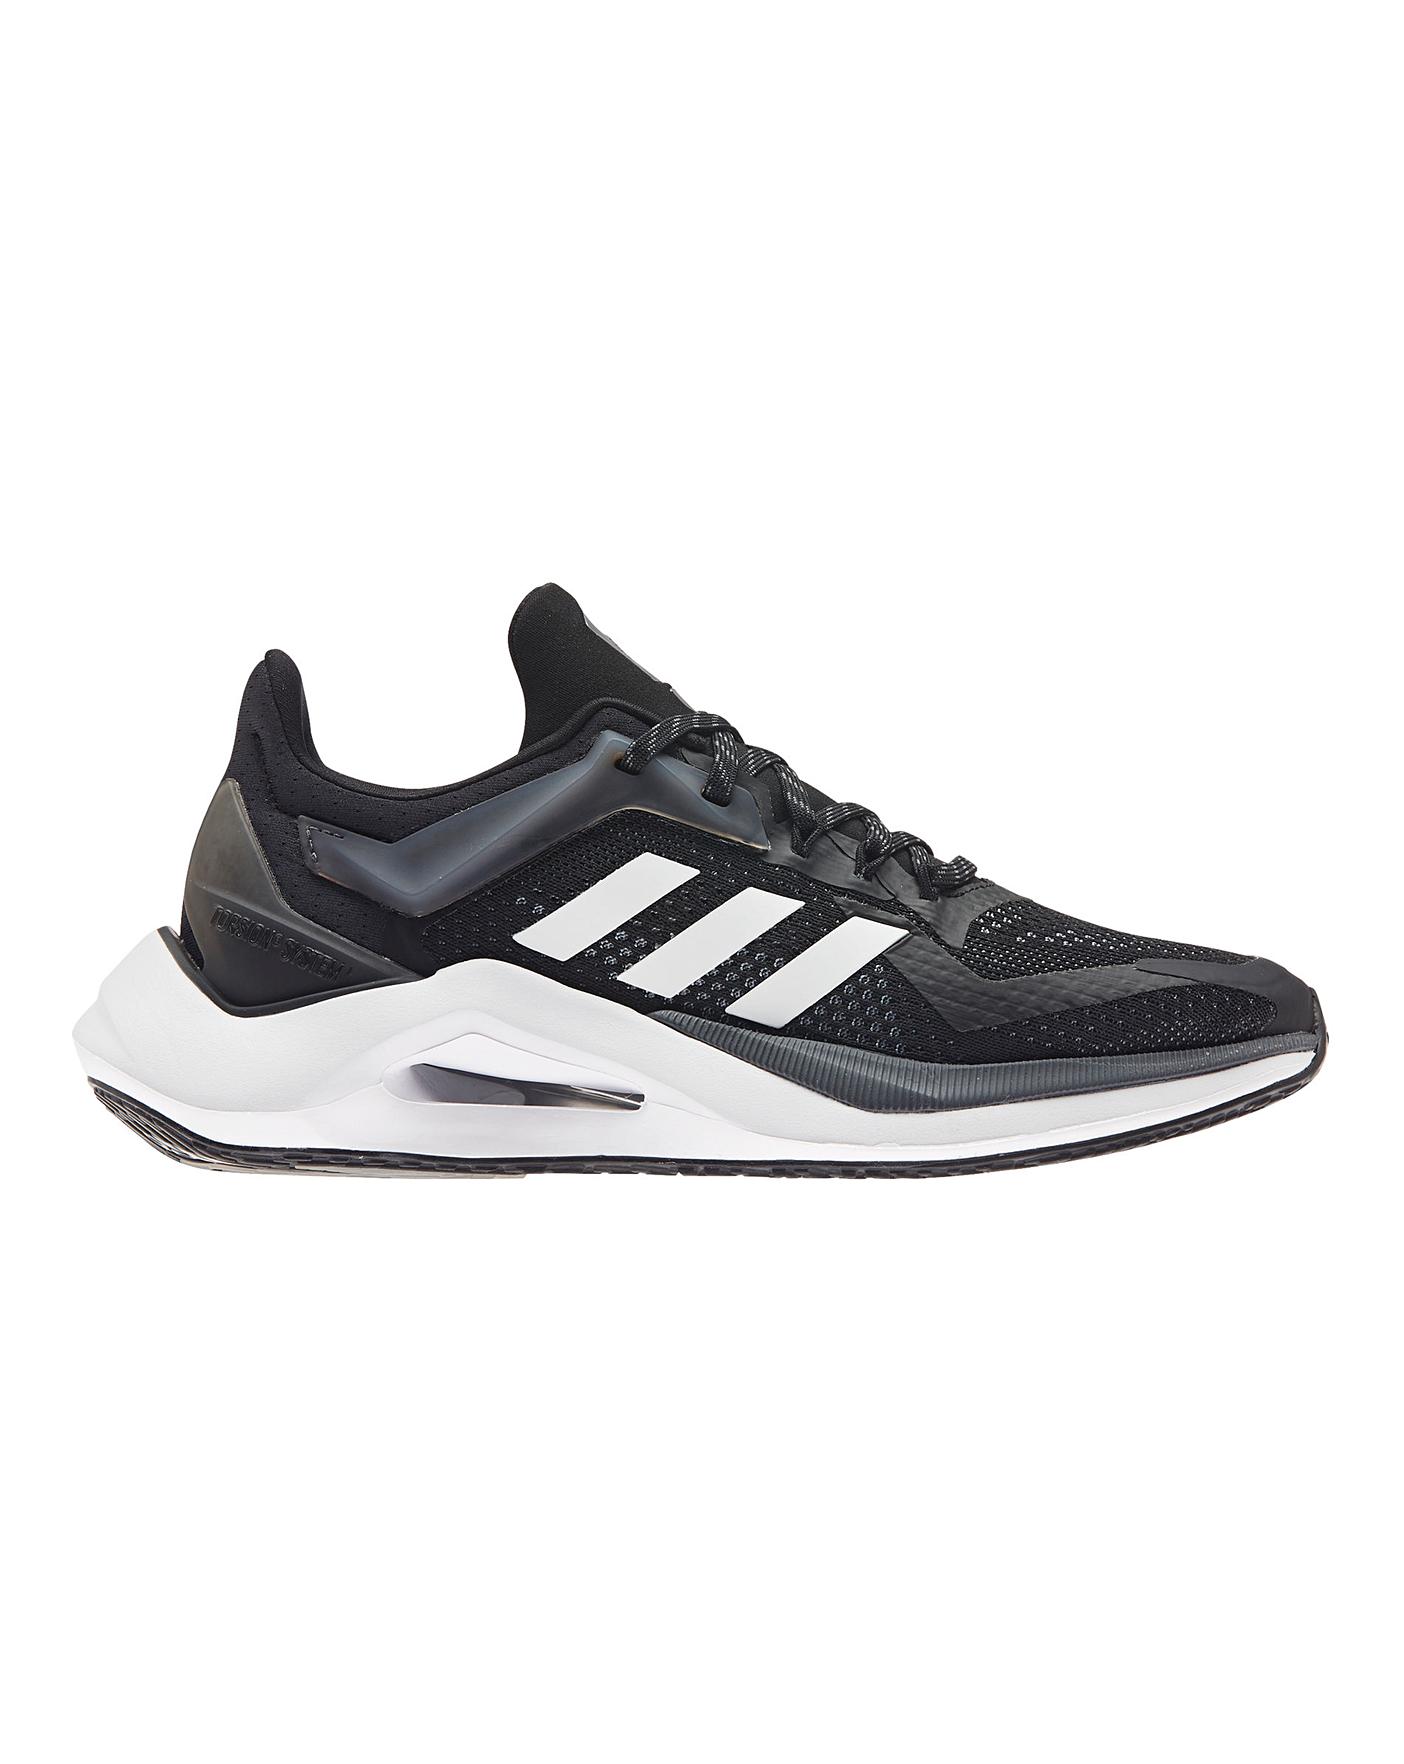 adidas Alphatorsion 2.0 Trainers | Oxendales